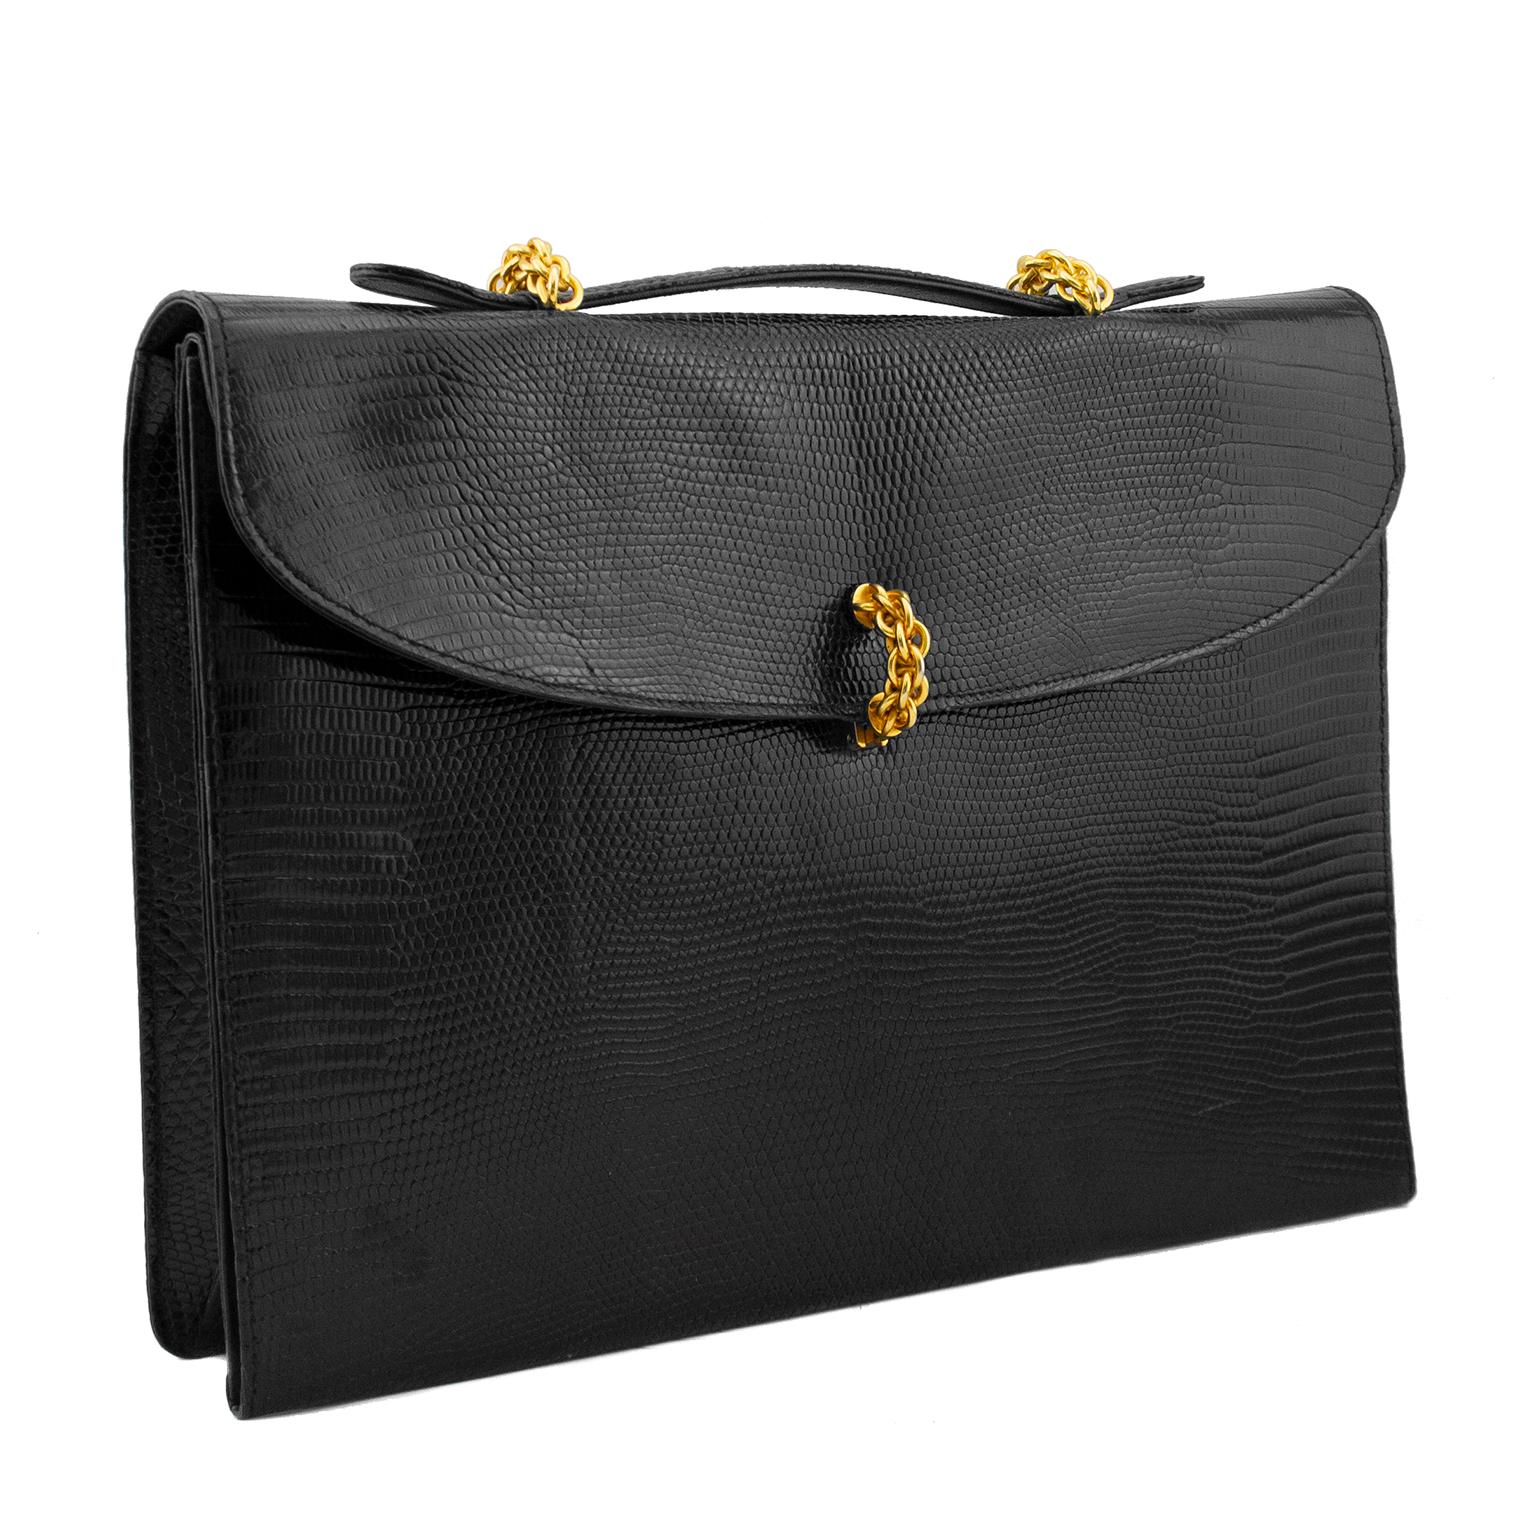 Absolutely stunning 1980s Paloma Picasso top handle black patterned leather briefcase. Gold tone chain clasp and details on handles. Opens flat with supple leather interior and many pockets for documents and cards. A smaller iPad will fit in